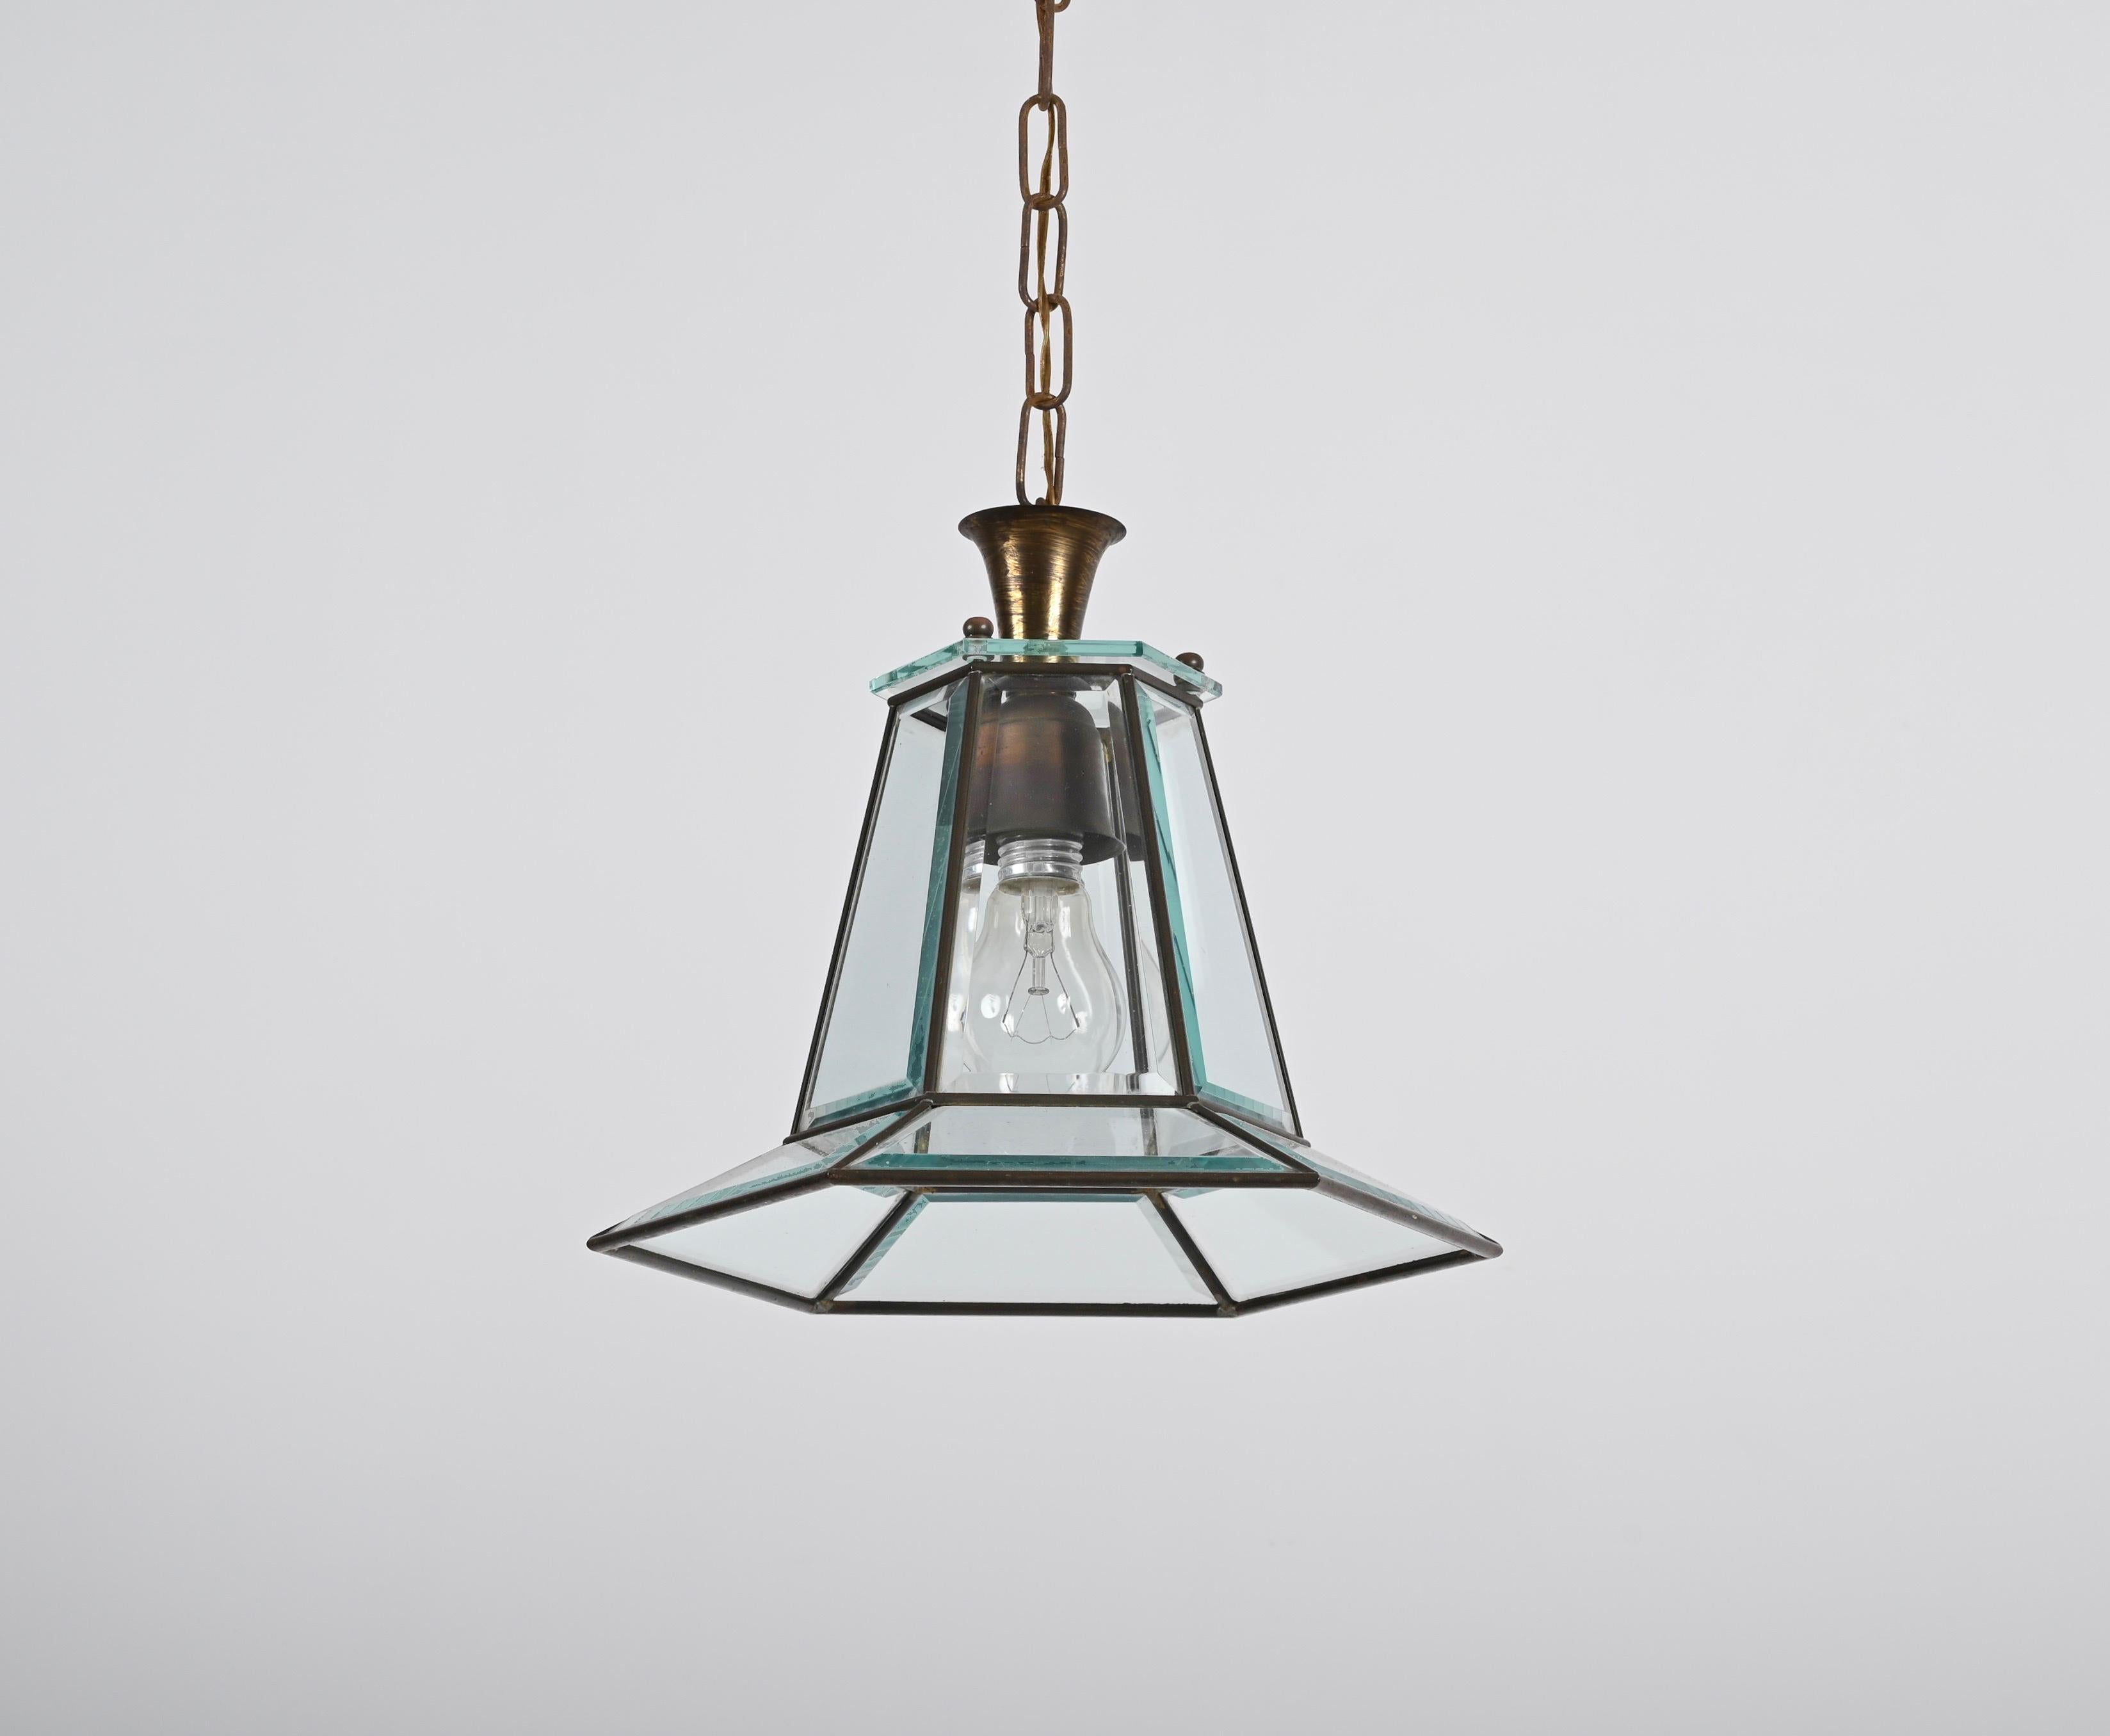 Brass and Beveled Glass Hexagonal Italian Chandelier After Adolf Loos, 1950s For Sale 2